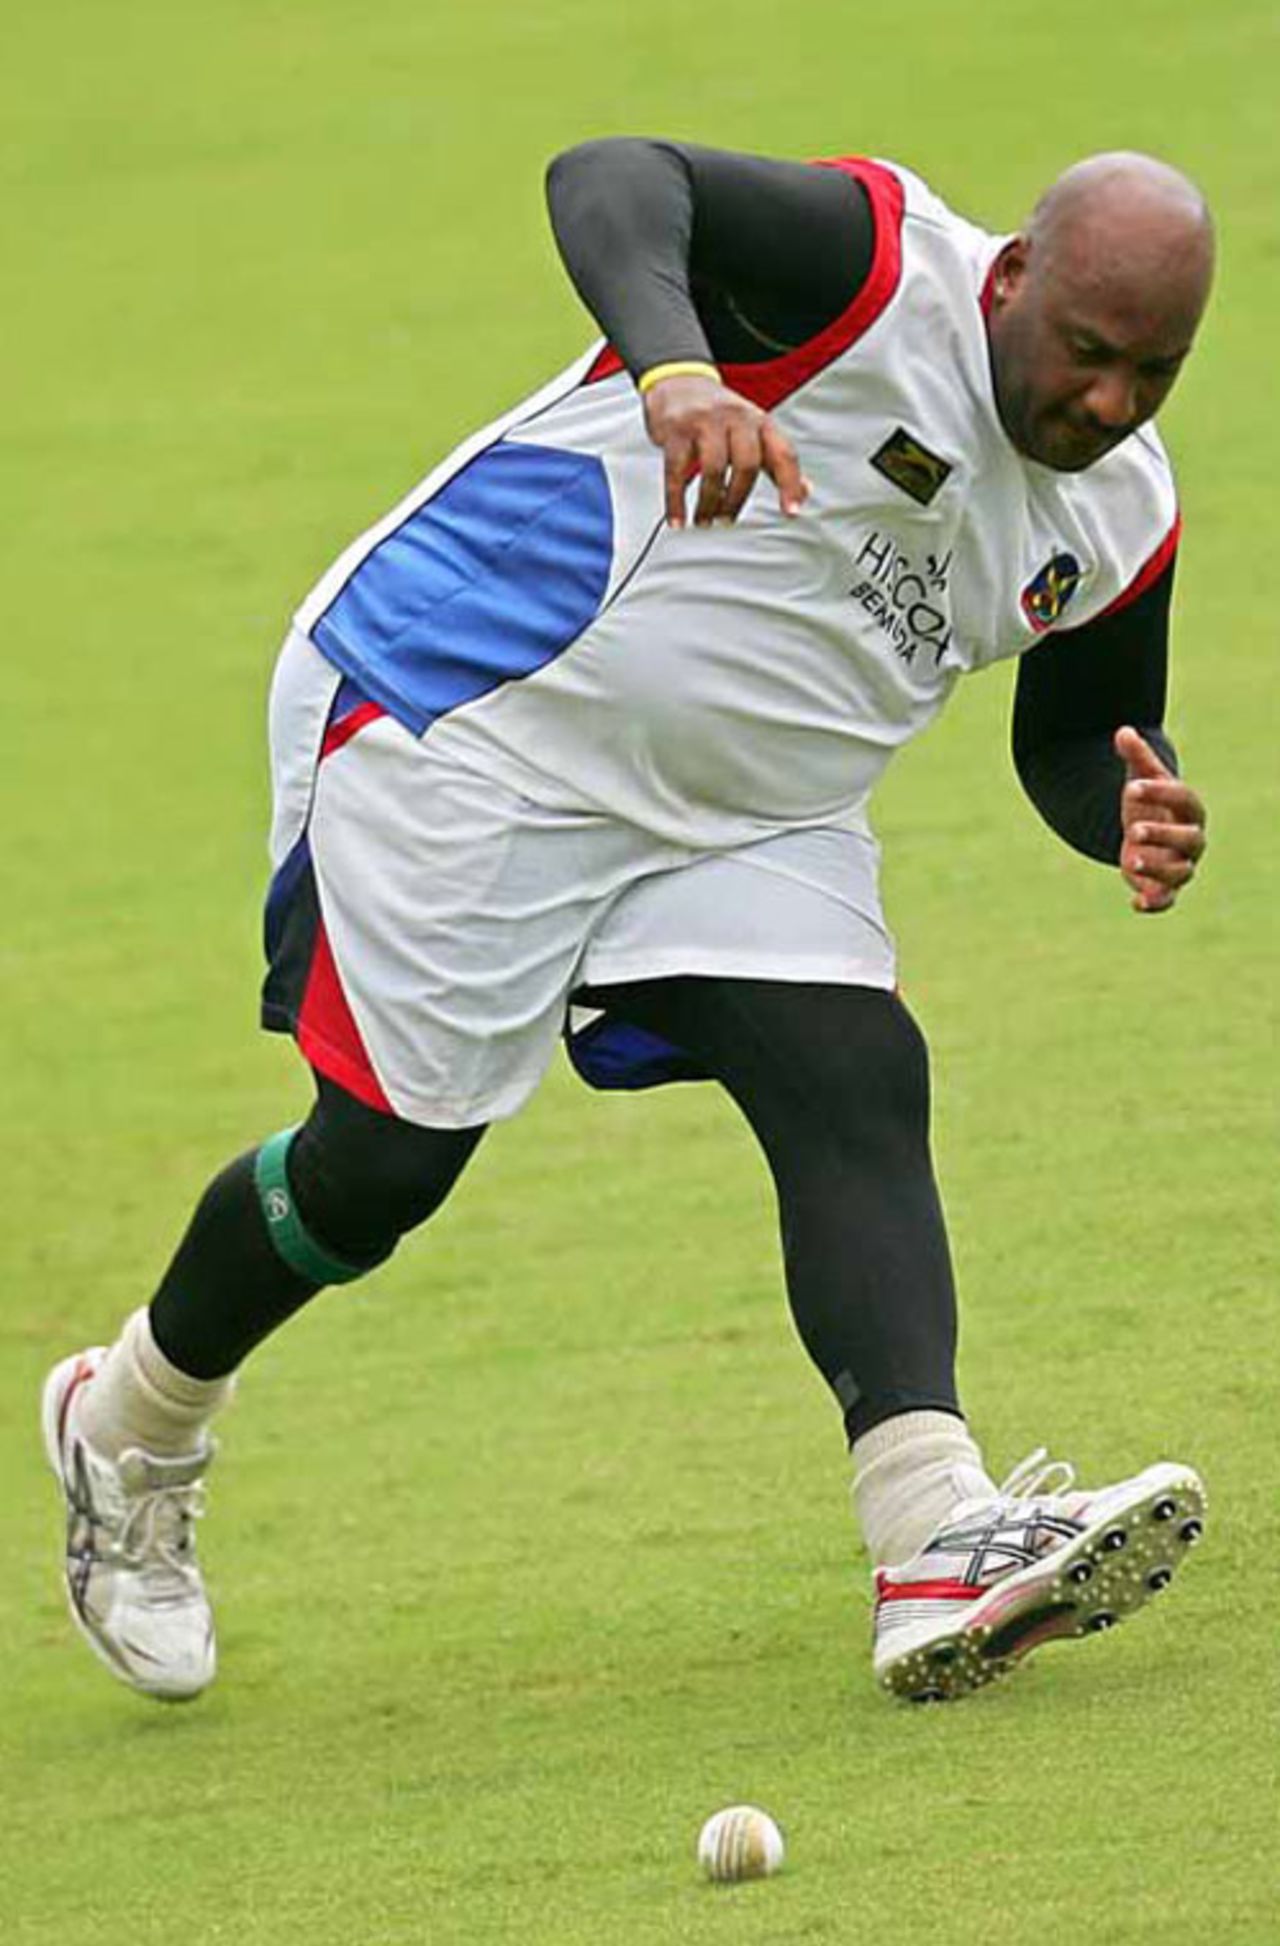 Dwayne Leverock tries his hand at fielding, Port of Spain, Trinidad, March 14, 2007